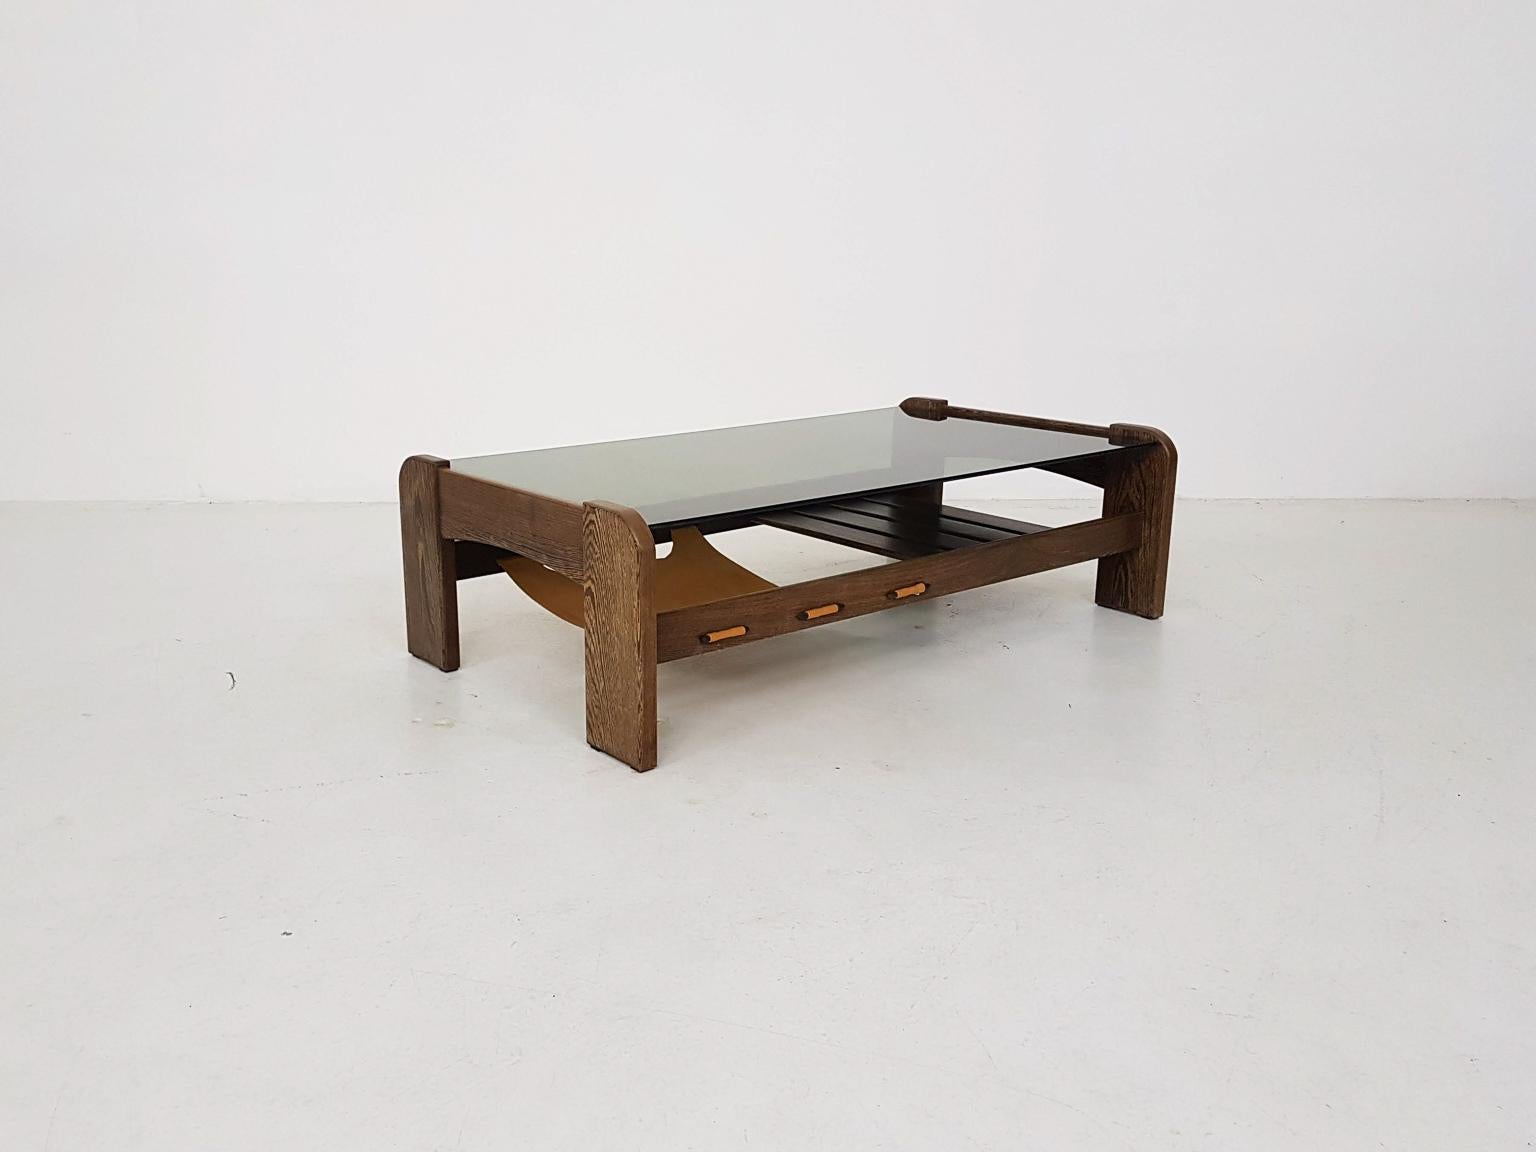 Brutalist Percival Lafer Attributed Glass, Wenge and Leather Coffee Table, Brasil, 1970s